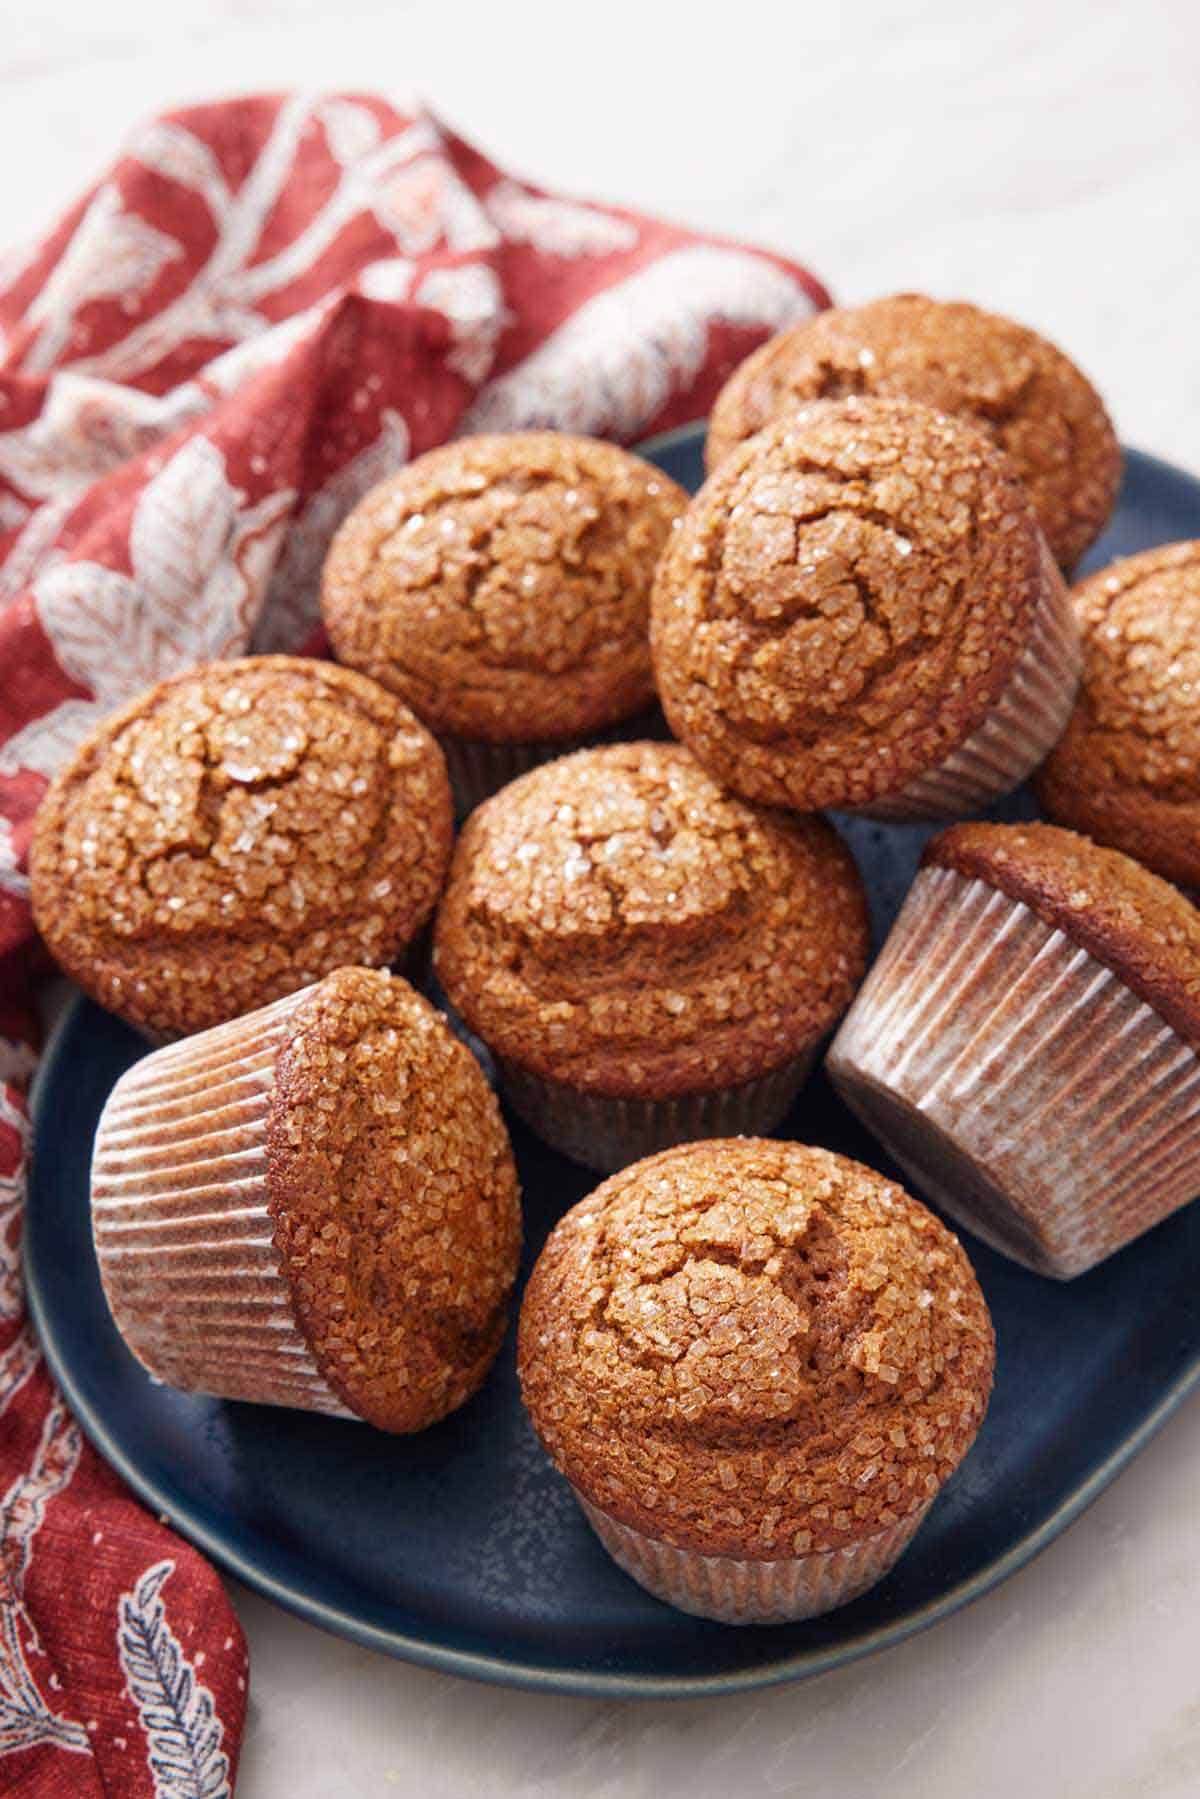 A platter of gingerbread muffins with a linen napkin beside it.